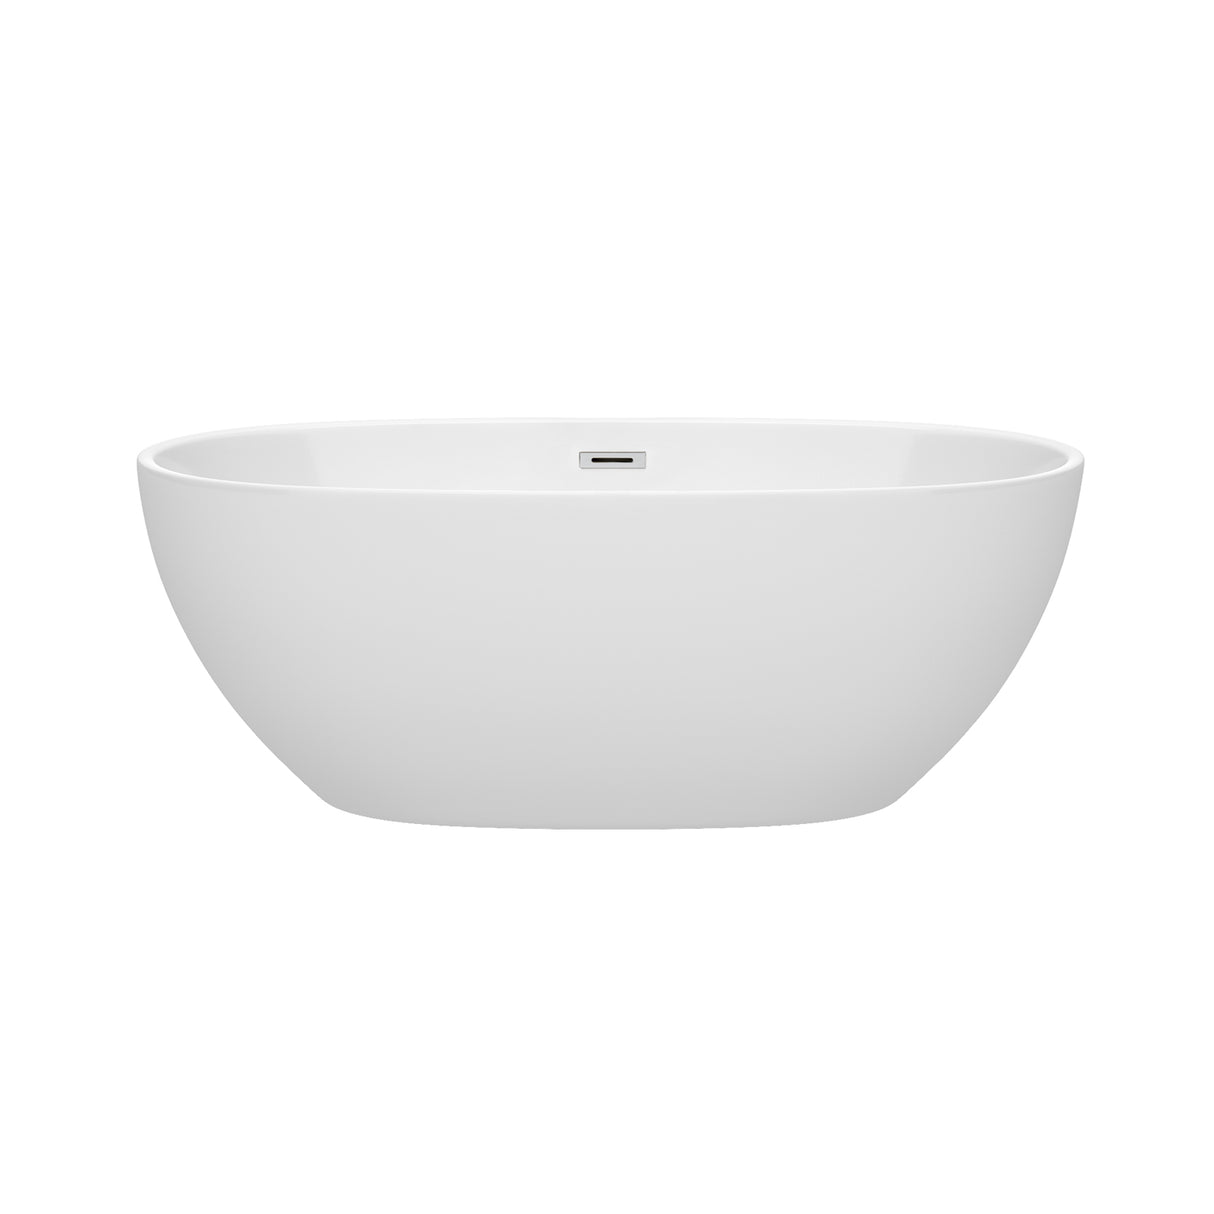 Juno 63 Inch Freestanding Bathtub in White with Polished Chrome Drain and Overflow Trim